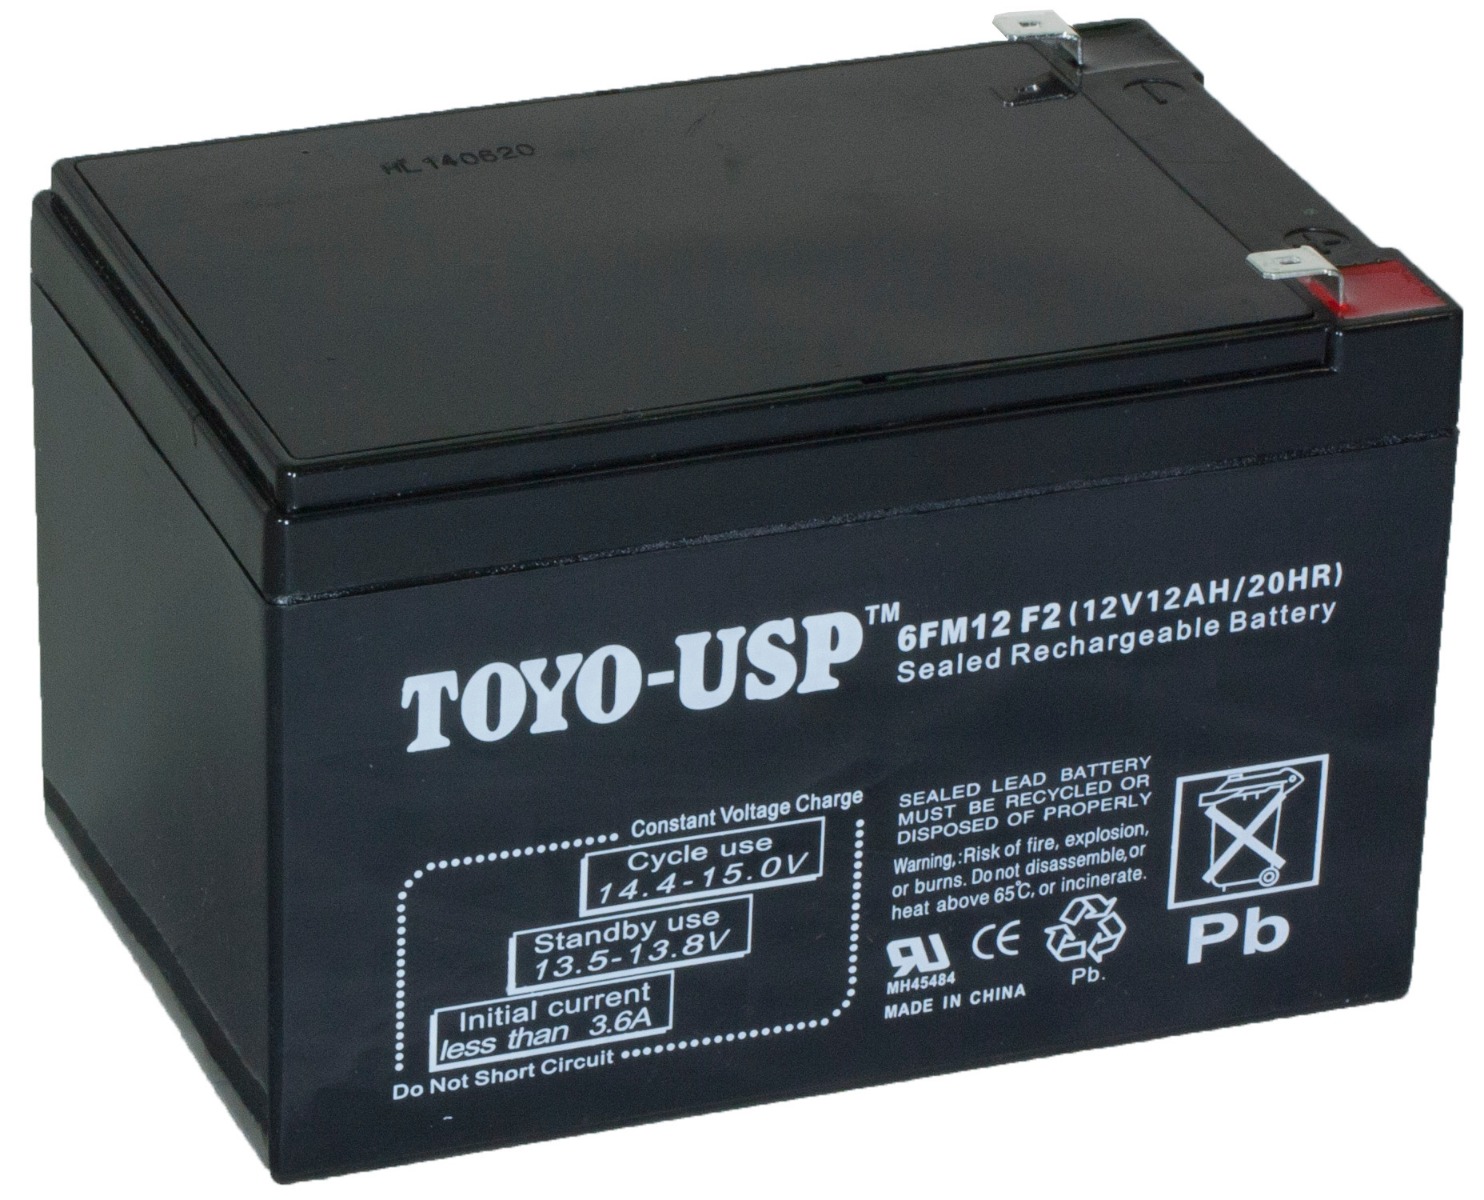 TOYO Sealed Lead Acid Battery 12V 12AH (6FM12) (Call To Order)